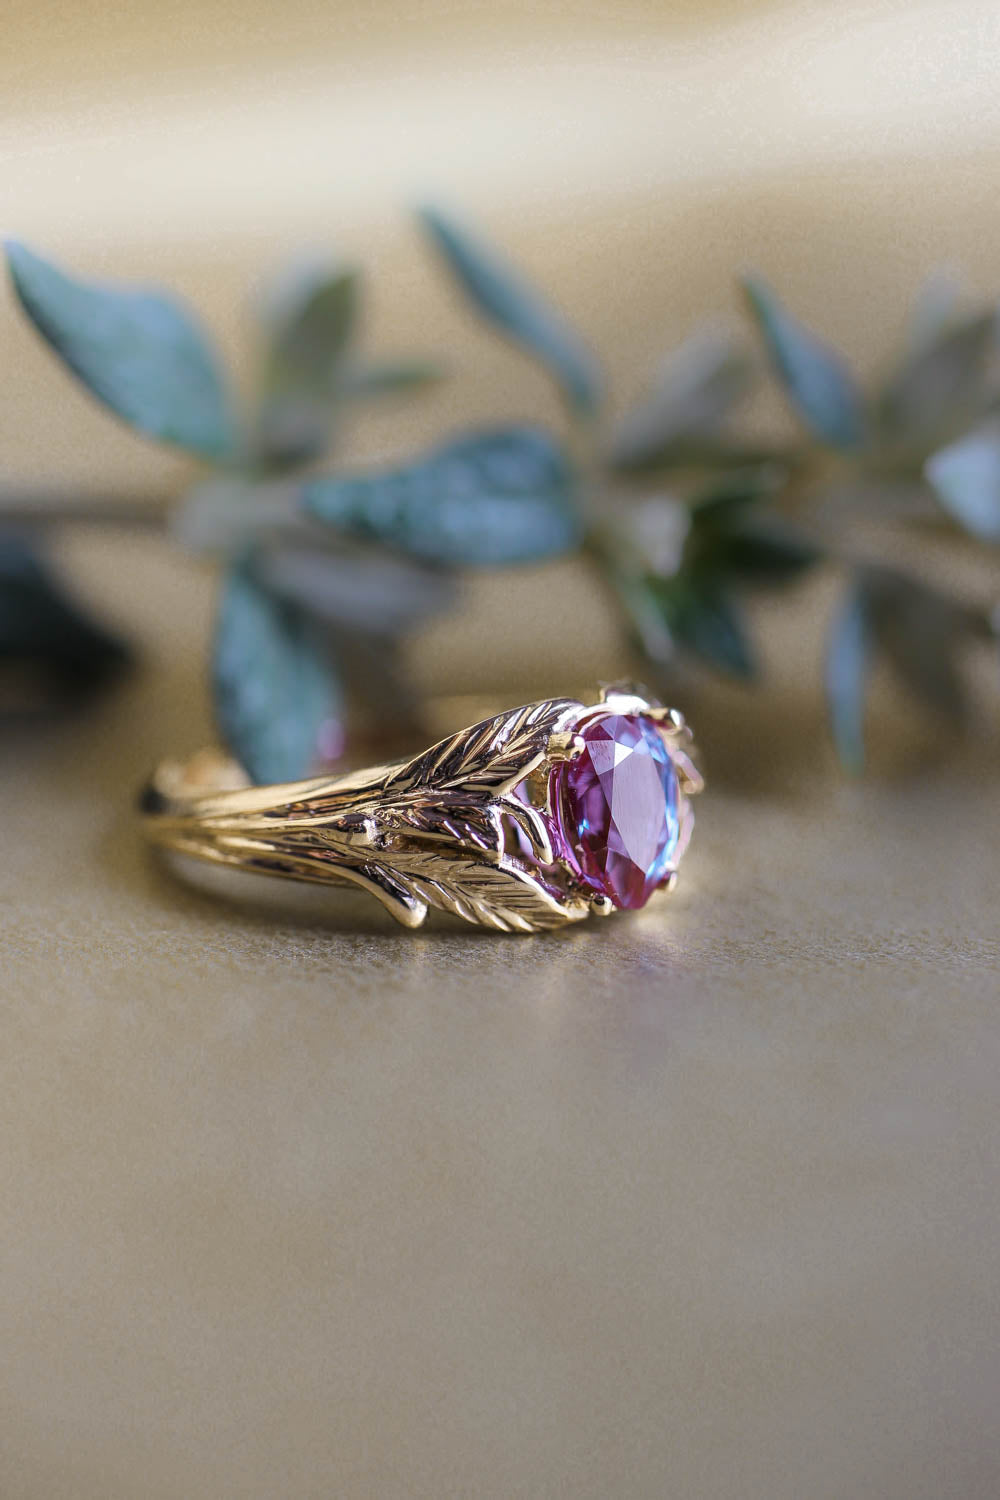 READY TO SHIP: Wisteria in 14K yellow gold, pear alexandrite 7x5 mm, RING SIZE - 8.25 US - Eden Garden Jewelry™